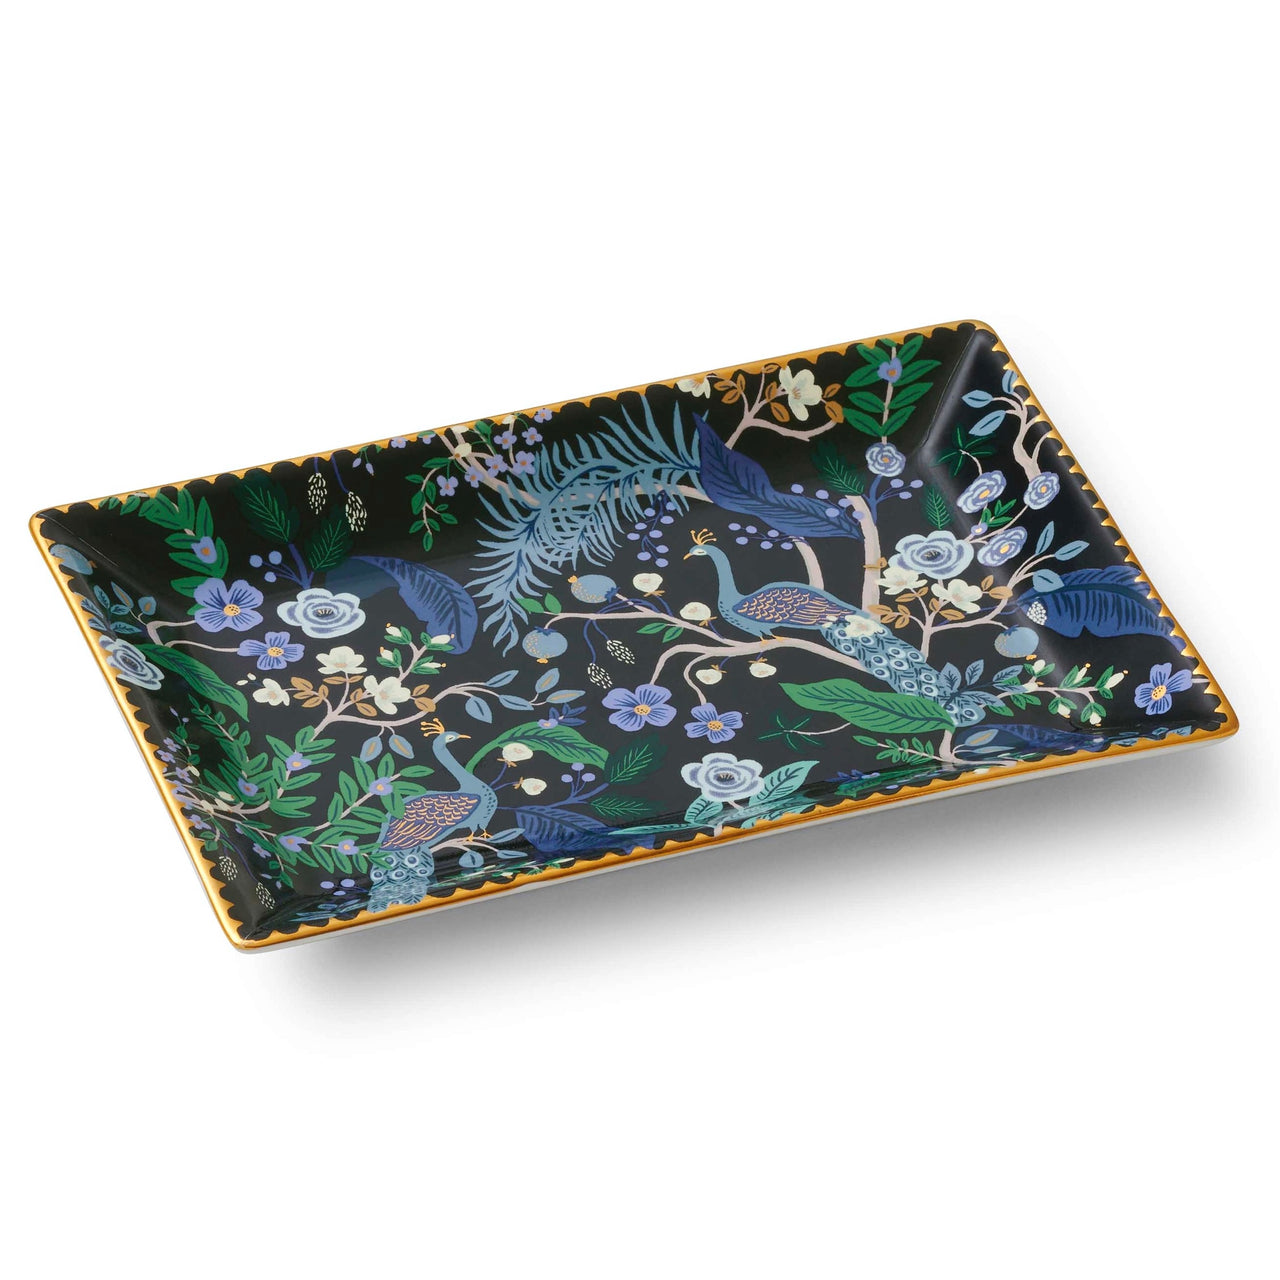 Alt View Peacock Catchall Tray